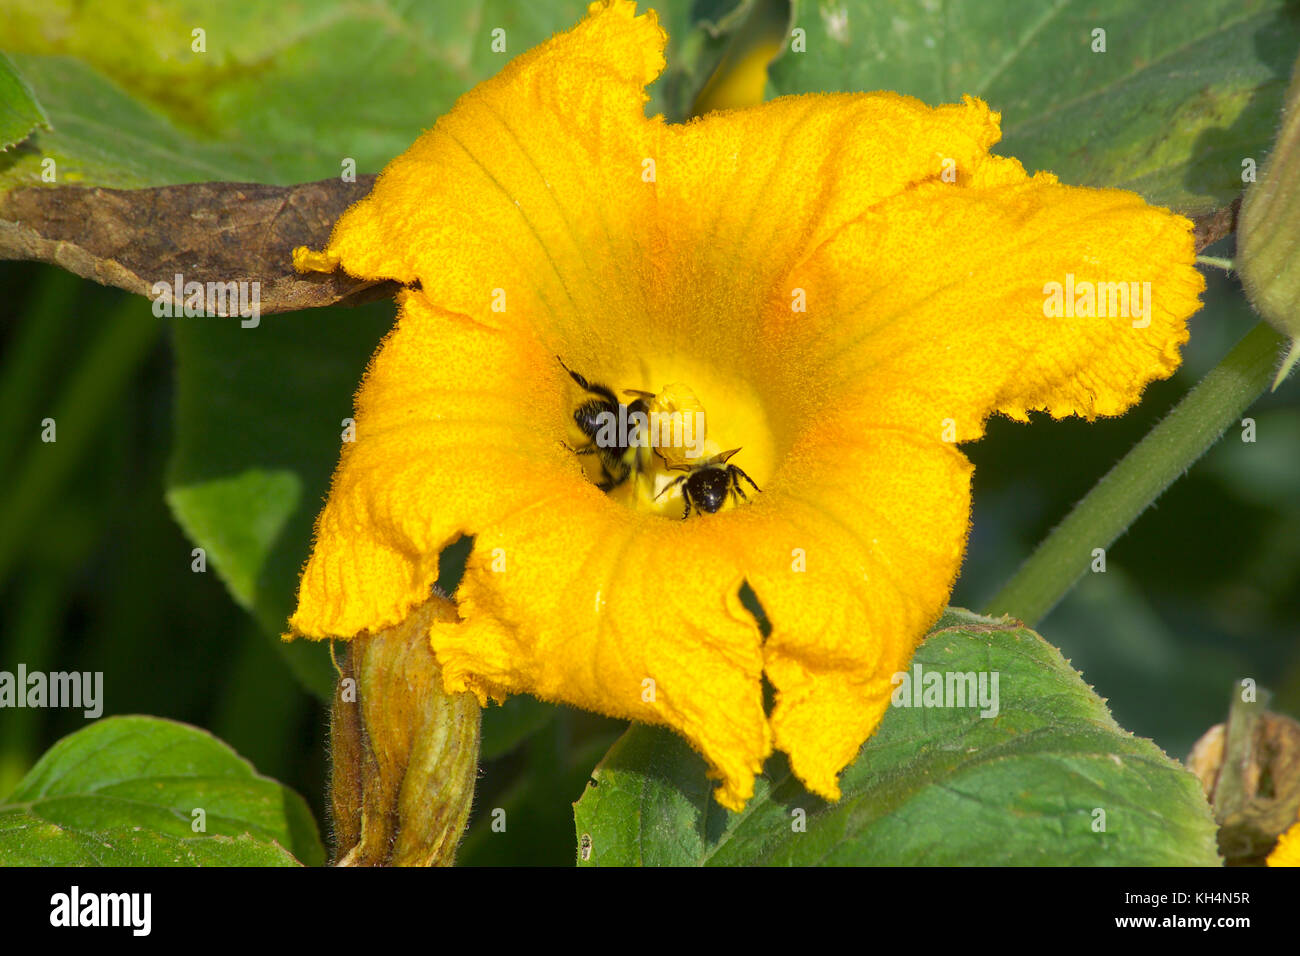 CLOSE UP OF PUMPKIN FLOWER WITH BEES Stock Photo Alamy